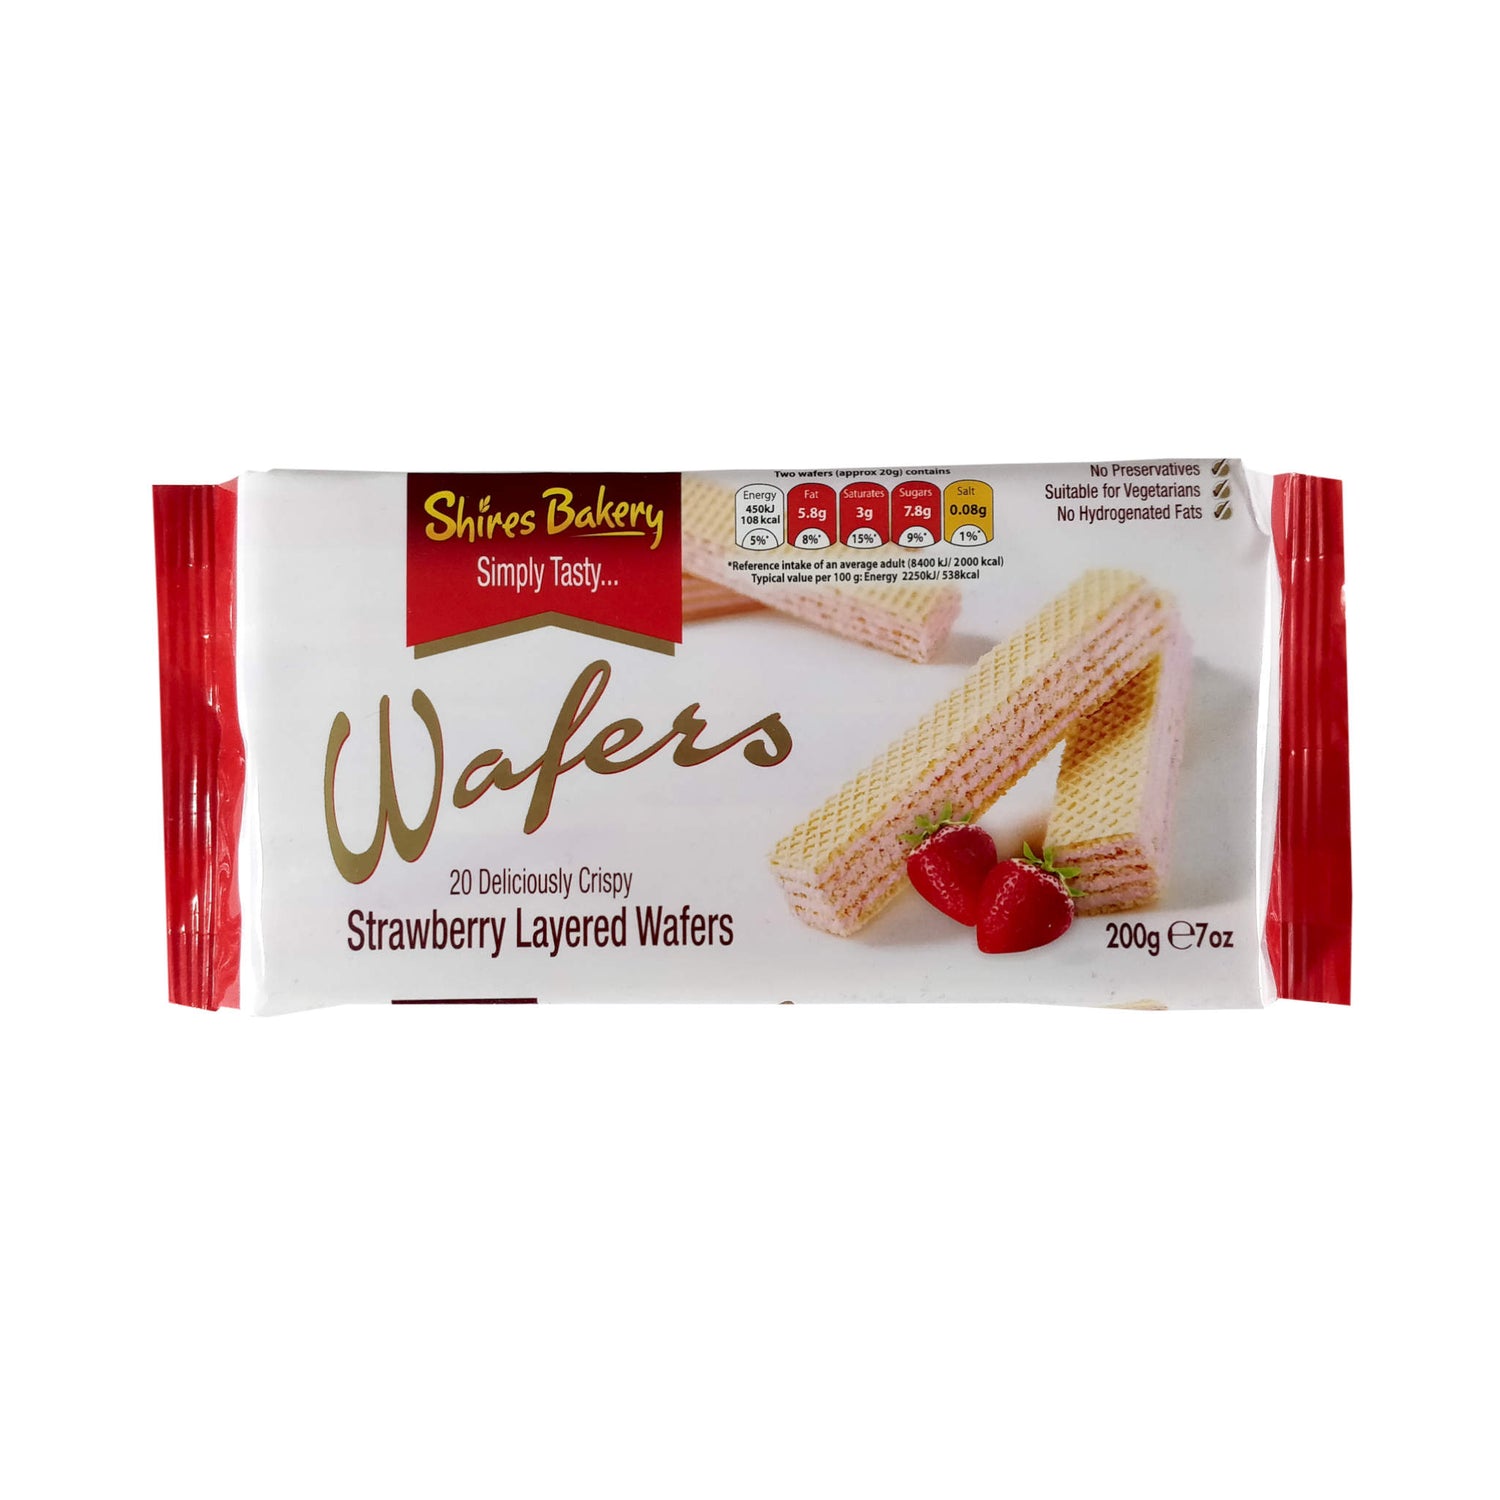 Shires Bakery Strawberry Layered Wafers 200g